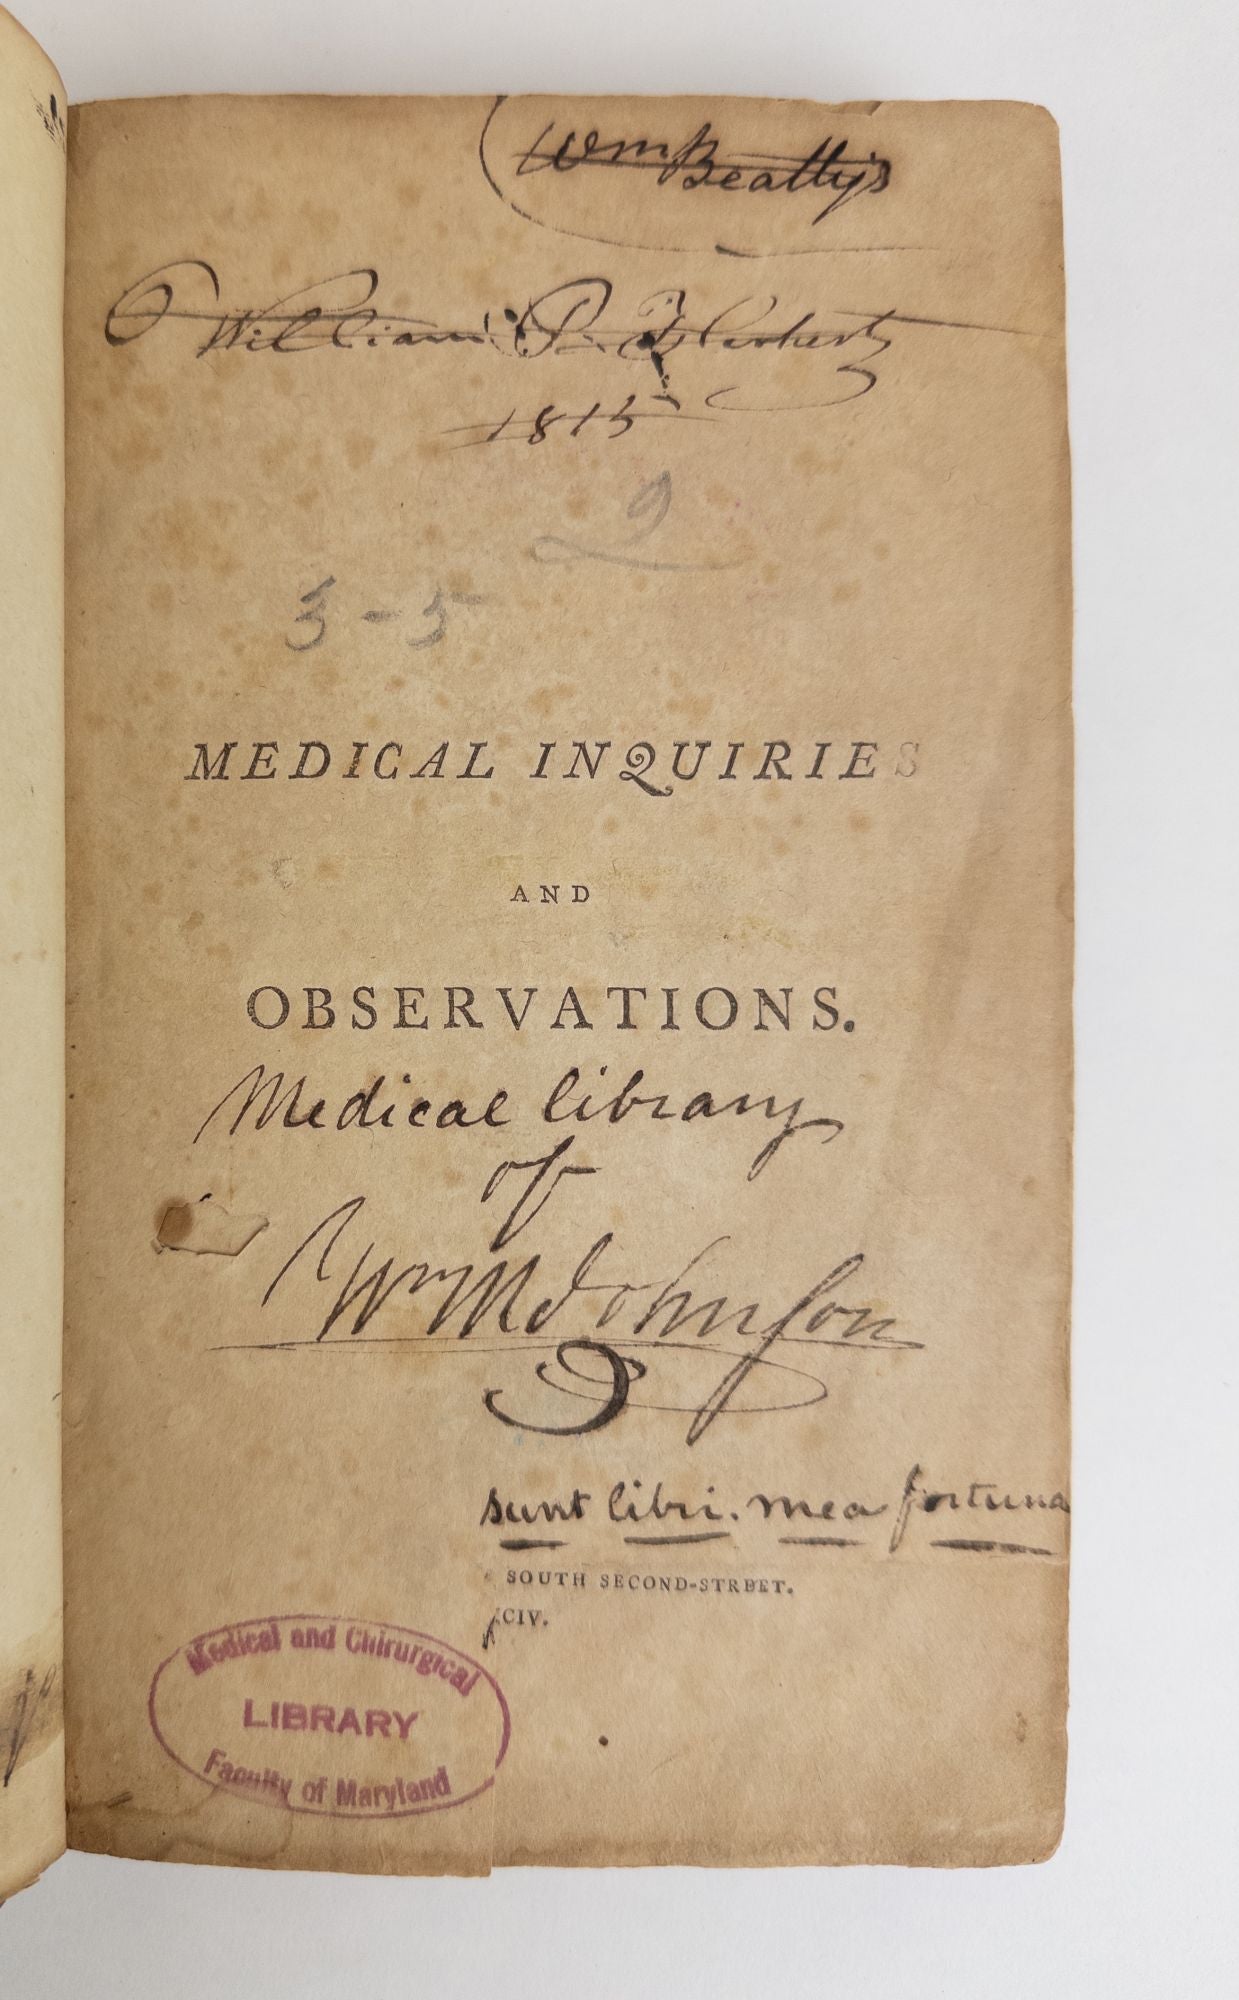 Product Image for MEDICAL INQUIRIES AND OBSERVATIONS [Five Volumes]